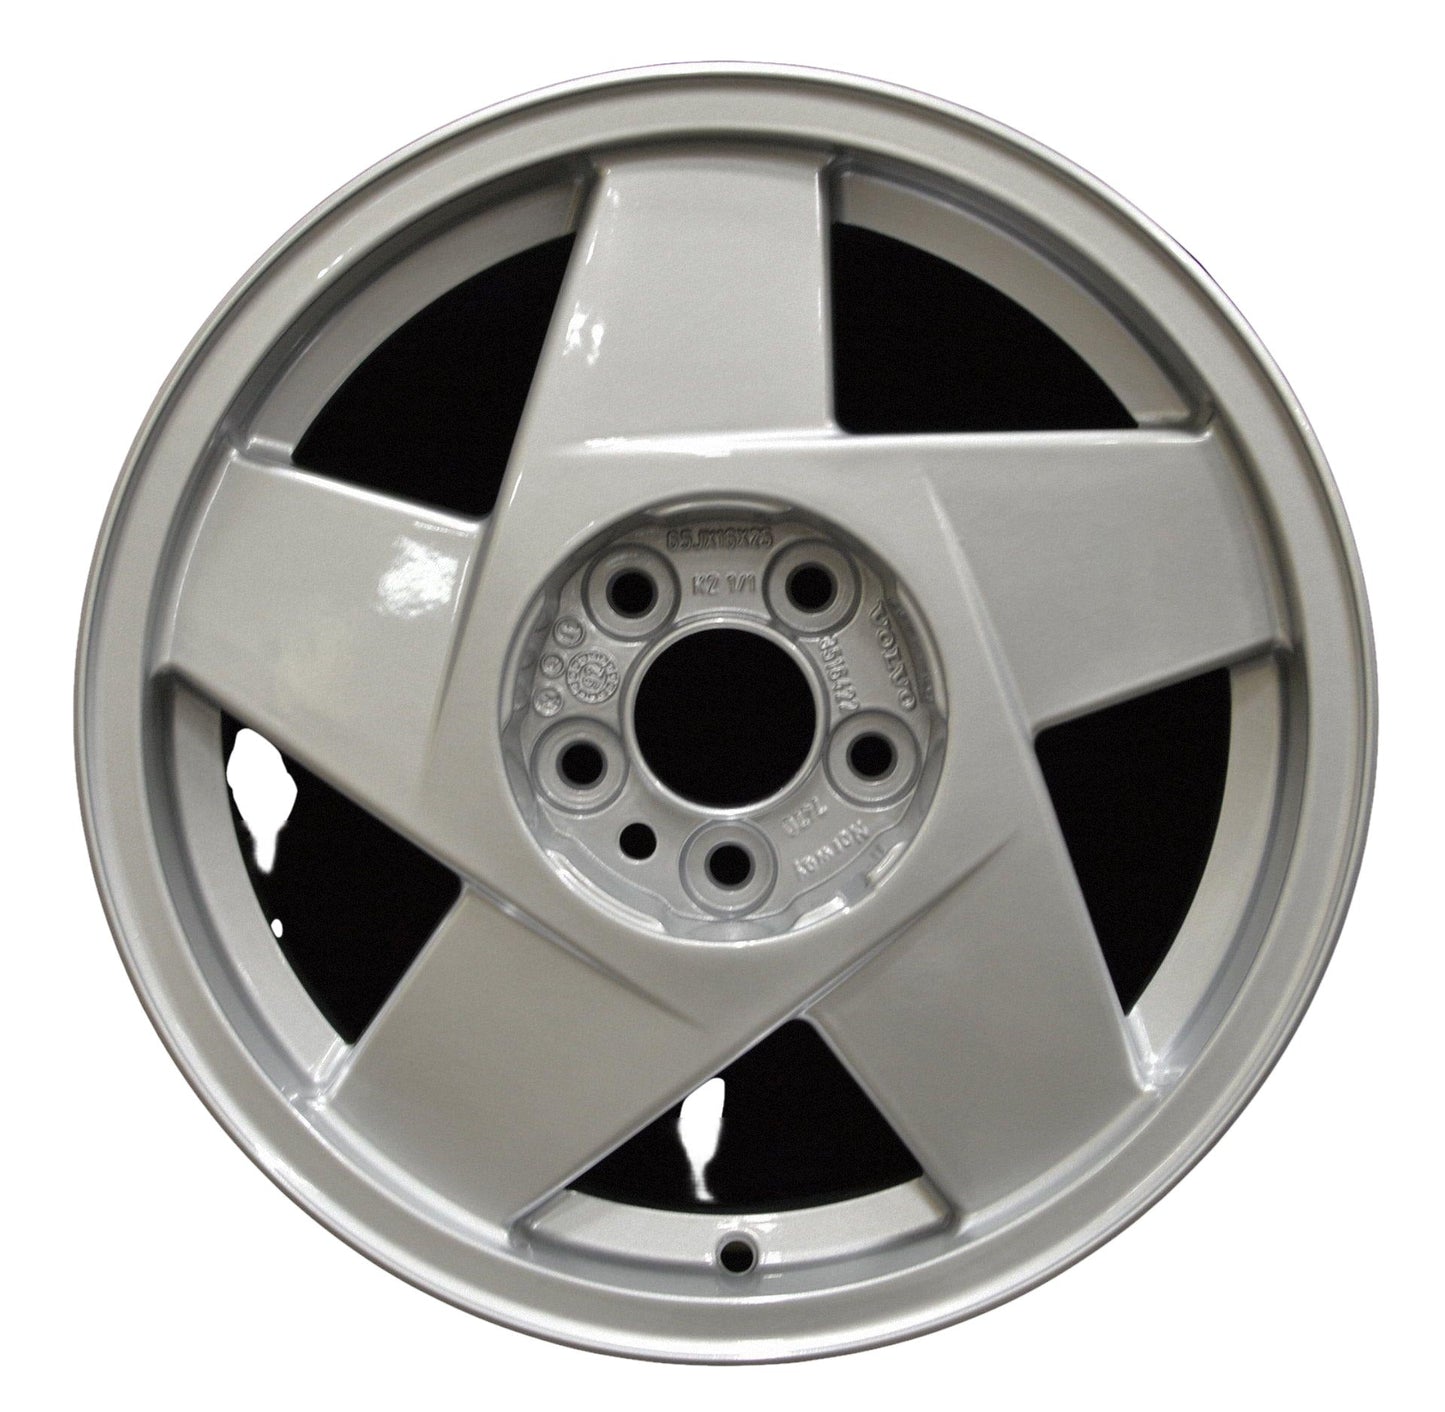 Volvo 740  1985, 1986, 1987, 1988, 1989, 1990, 1991, 1992 Factory OEM Car Wheel Size 16x6.5 Alloy WAO.70168.PS03.FF